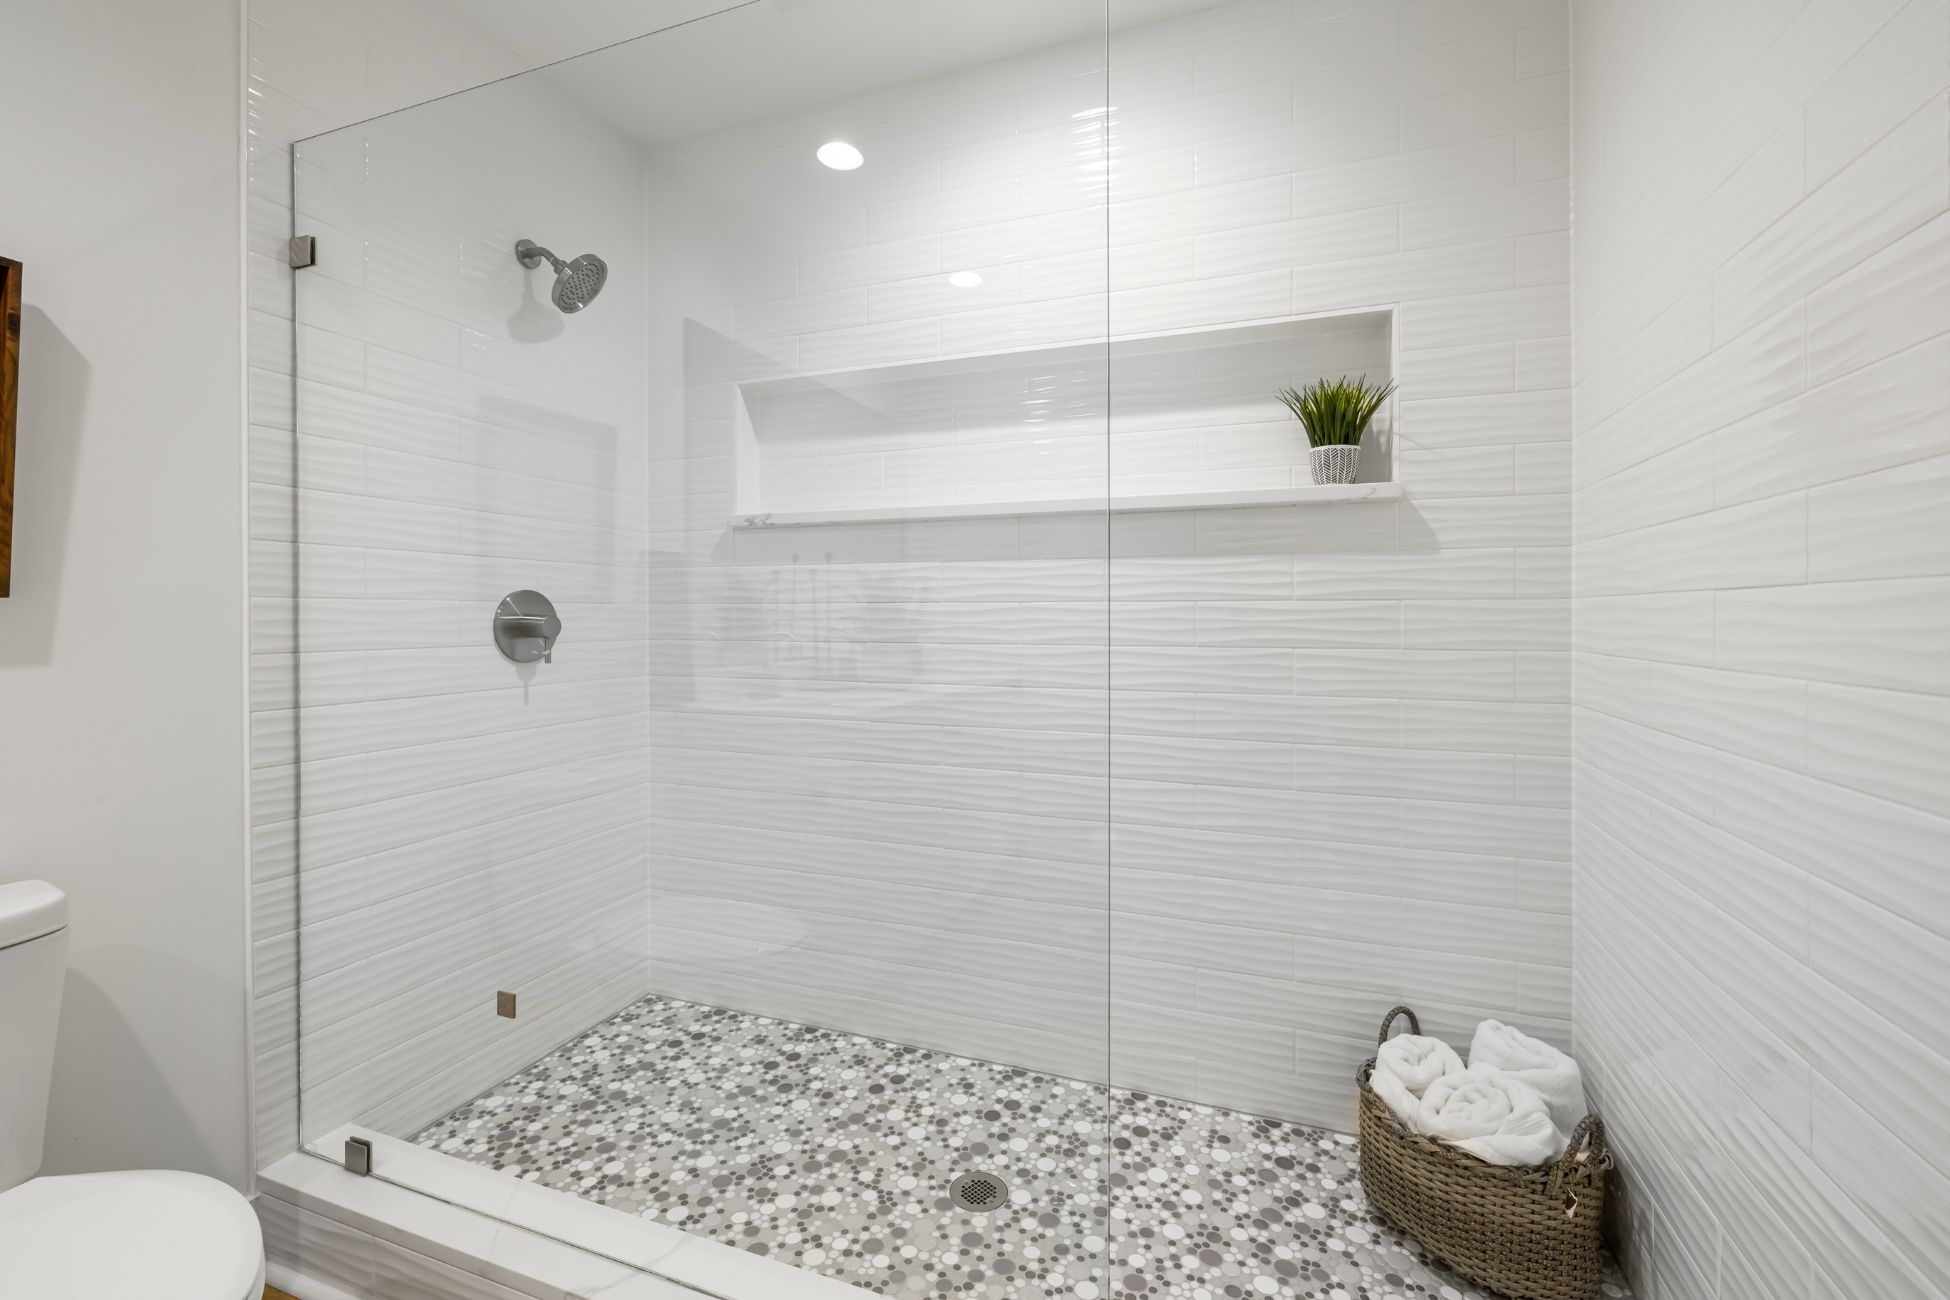 White Bathroom with shower in glass enclosure